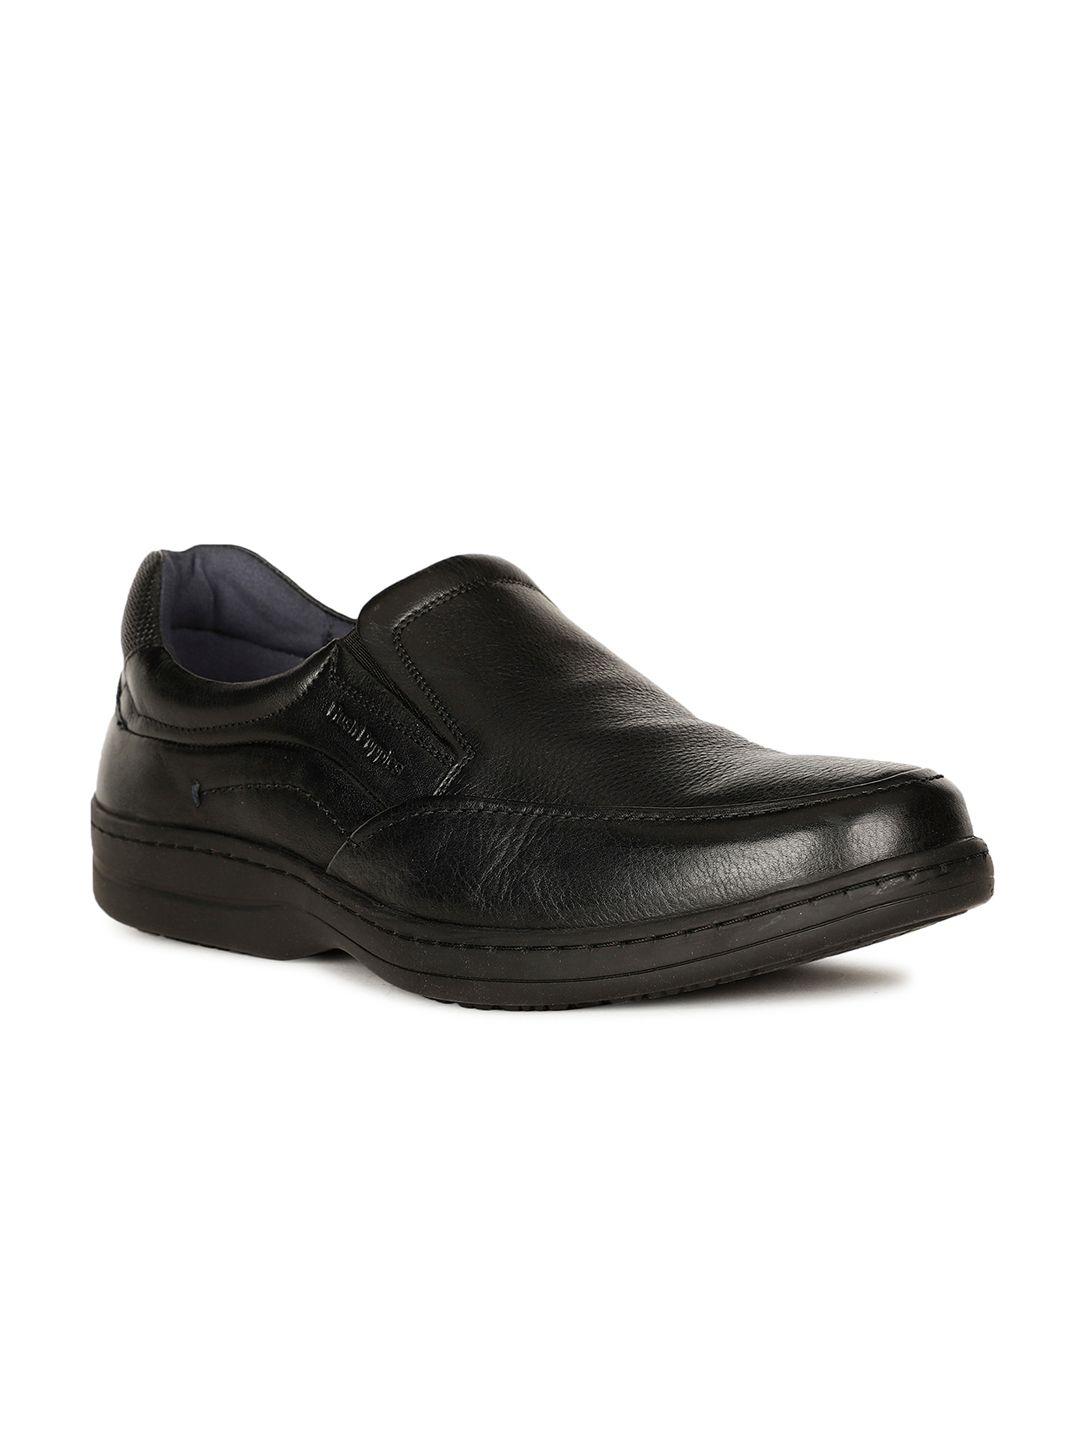 hush-puppies-men-textured-leather-formal-slip-on-shoes